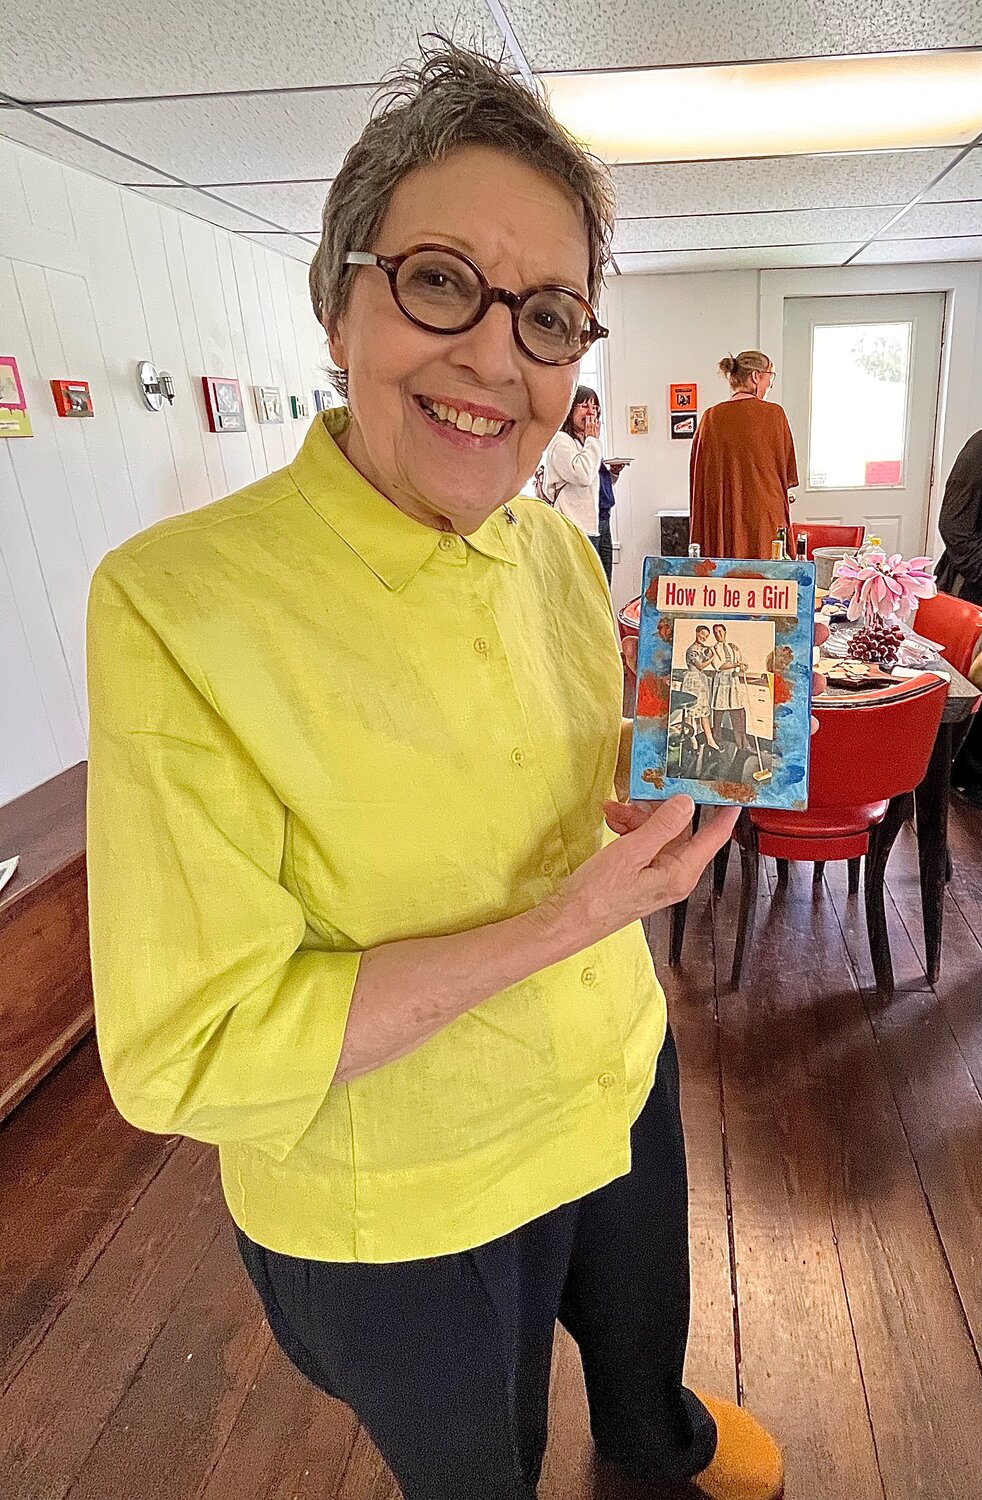 Barbara (Winfield, not Fox) was all smiles at the opening reception of "Mad Ads and Funny Phrases" in Youngsville, NY, last weekend, but I'm fairly sure the piece in her hand, "How to be a Girl," is laced with sarcasm and biting social satire.